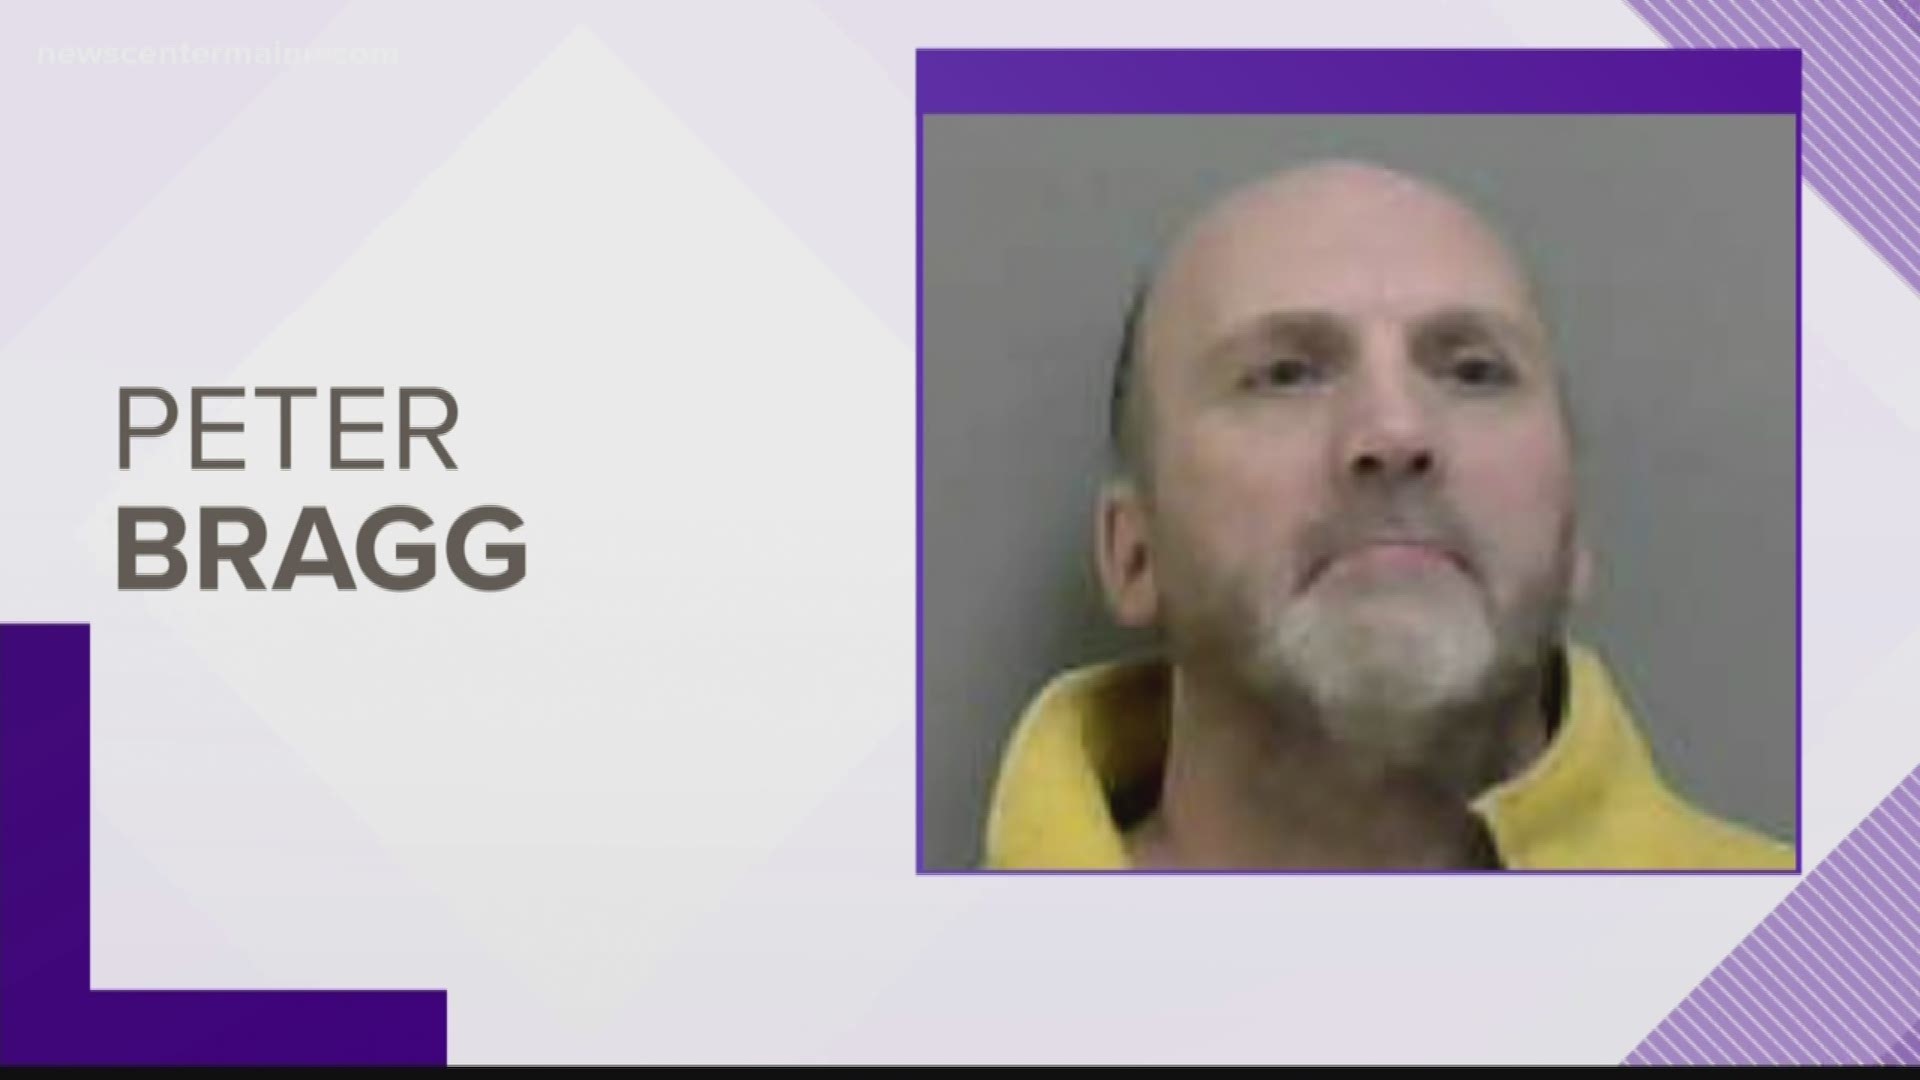 Police say Peter Bragg was found with 65 grams of heroin, with a street value of $10,000. Angela Orcutt was also charged with possession of drugs.